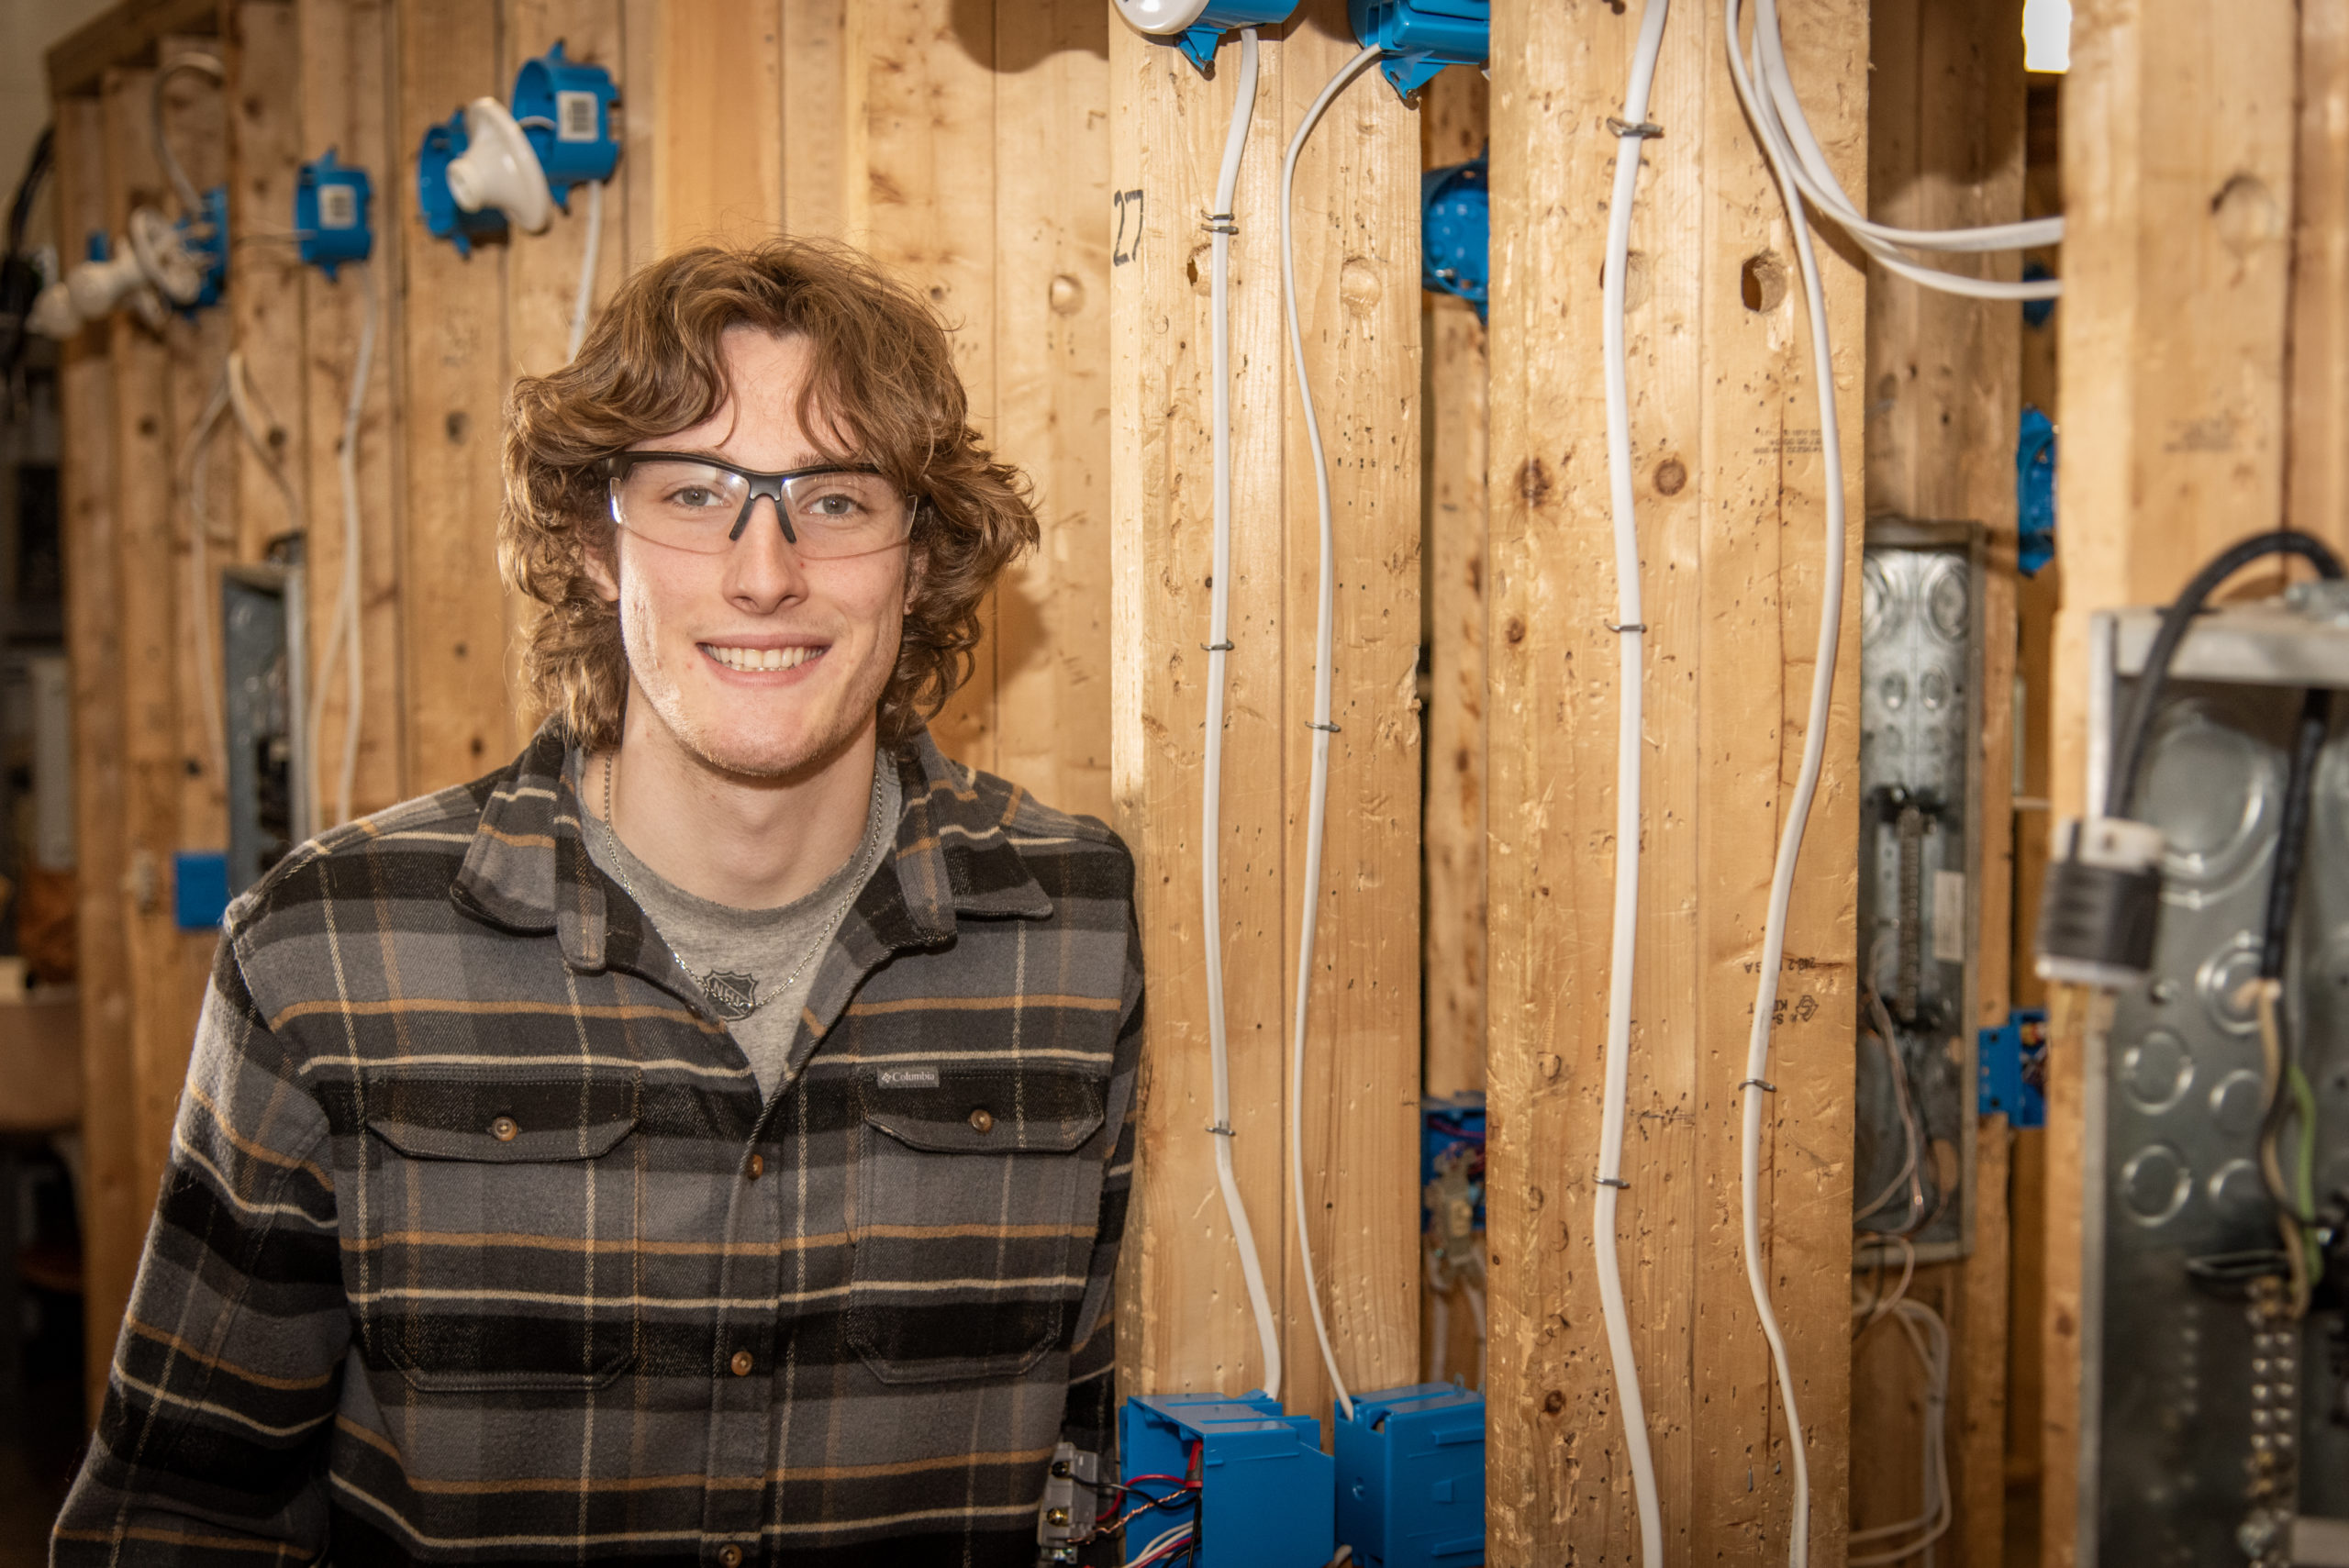 A student in the Electrical Technology program at Thaddeus Stevens College smiles at the camera while in the lab.